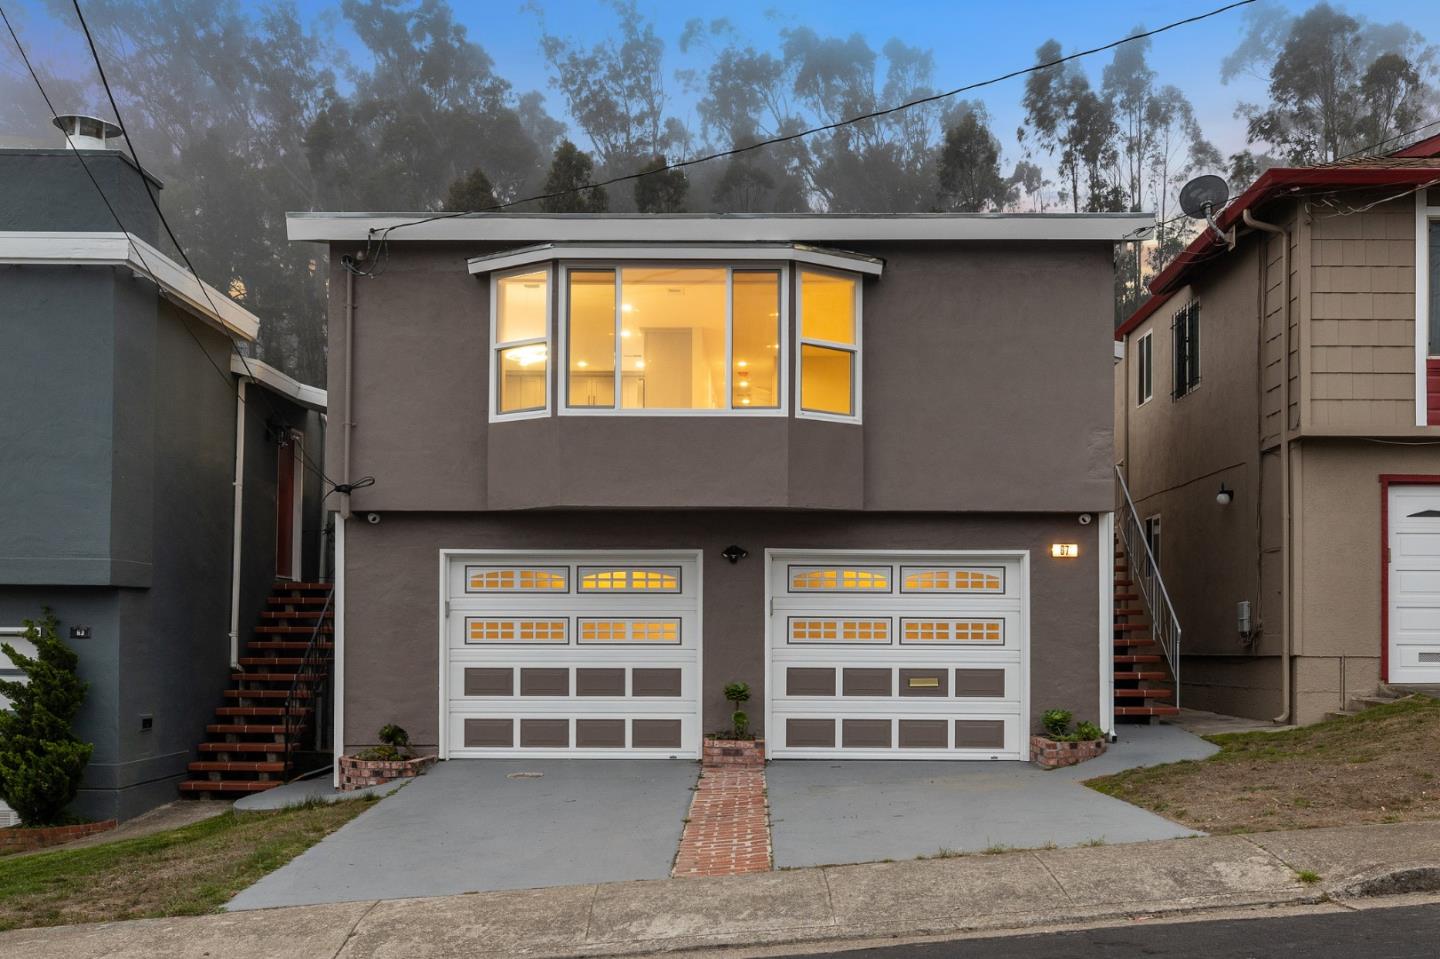 GORGEOUS NEWLY RENOVATED home in the Southern Hill neighborhood of Daly City! This 5 bedroom, 3 bathroom home offers beautifully modern improvements with an open floor plan. On the top floor, you will find a spacious living & dining area that transitions seamlessly into the kitchen, which features gorgeous gray cabinetry, quartz countertops, & stainless steel appliances, along with 3 sizable bedrooms & 2 updated full bathrooms. The lower level features an additional 2 bedrooms & bathroom, perfect for creating a dualistic living space between both the upper and lower levels. Enjoy your morning coffee surrounded by greenery or watch the sunset from the direct bedroom access to the upper level of the deck, while also being able to entertain family & friends on the spacious lower level of the deck. Conveniently located next to a variety of parks for those who enjoy the outdoors, the Cow Palace event center and major highways 101/280.